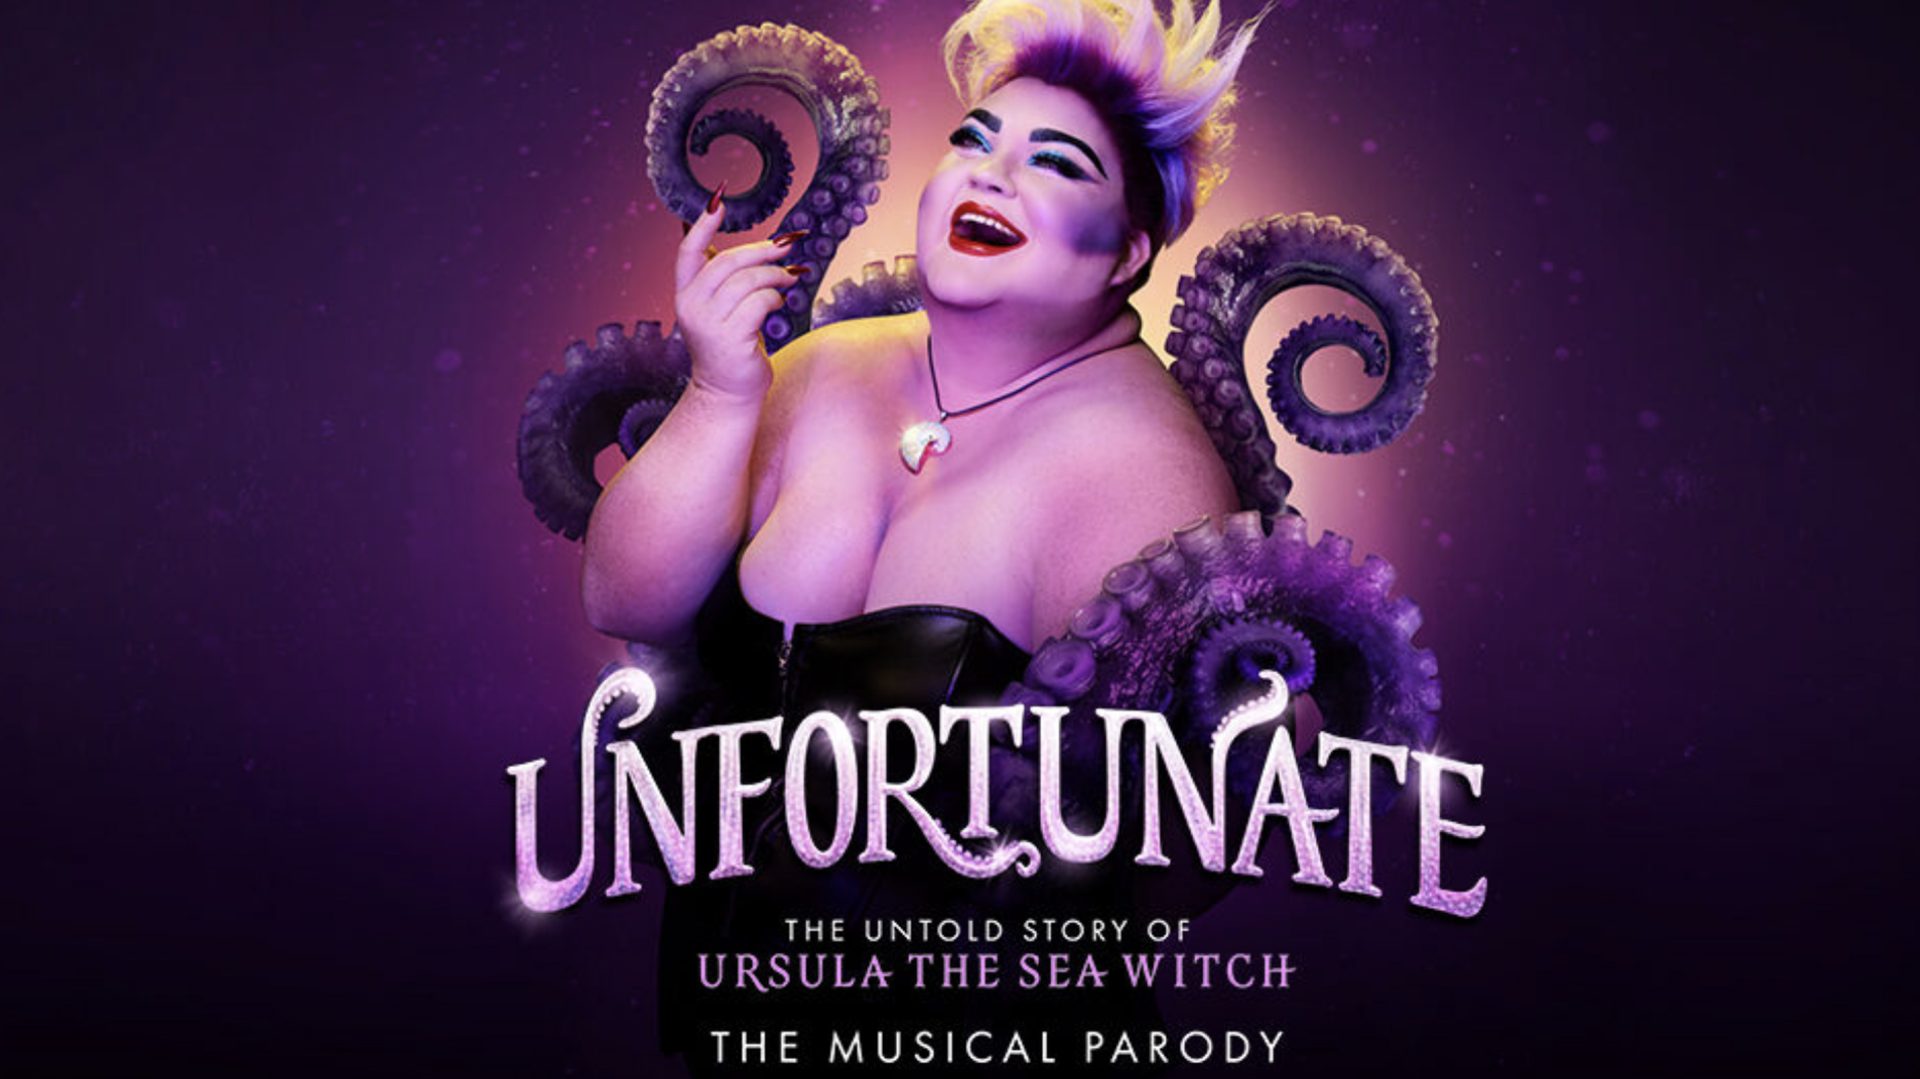 Unfortunate: The Untold Story Of Ursula The Sea Witch heads out on UK tour following triumphant London run